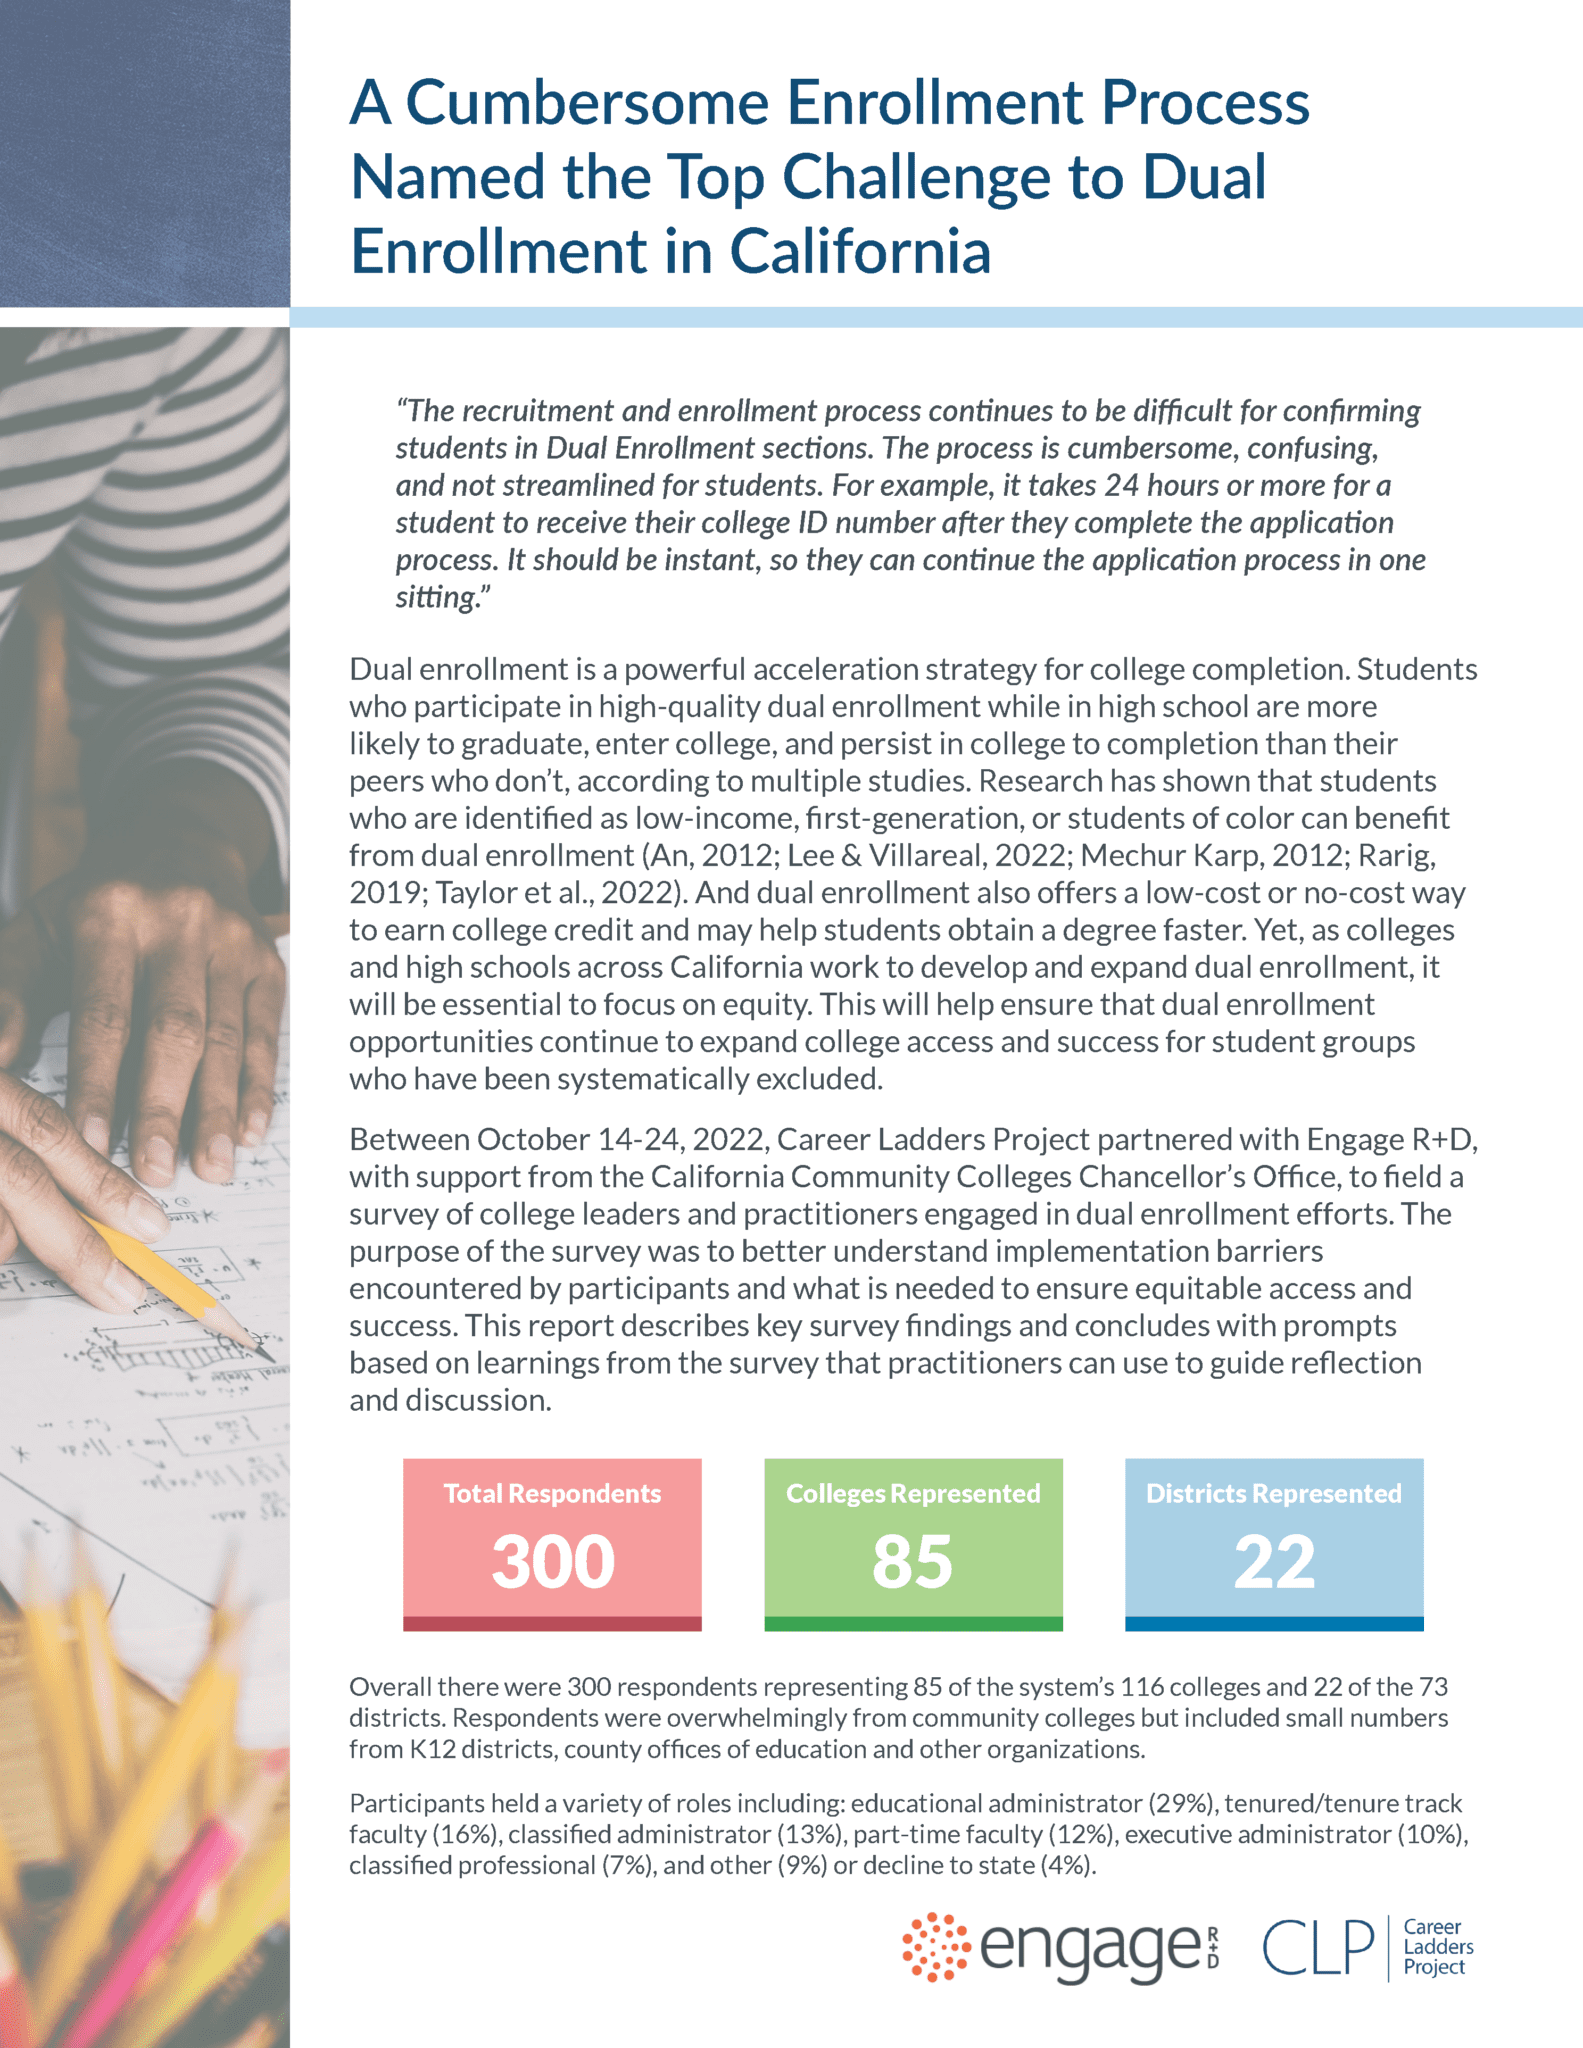 A Cumbersome Enrollment Process Named the Top Challenge to Dual enrollment in California cover page_Page_1